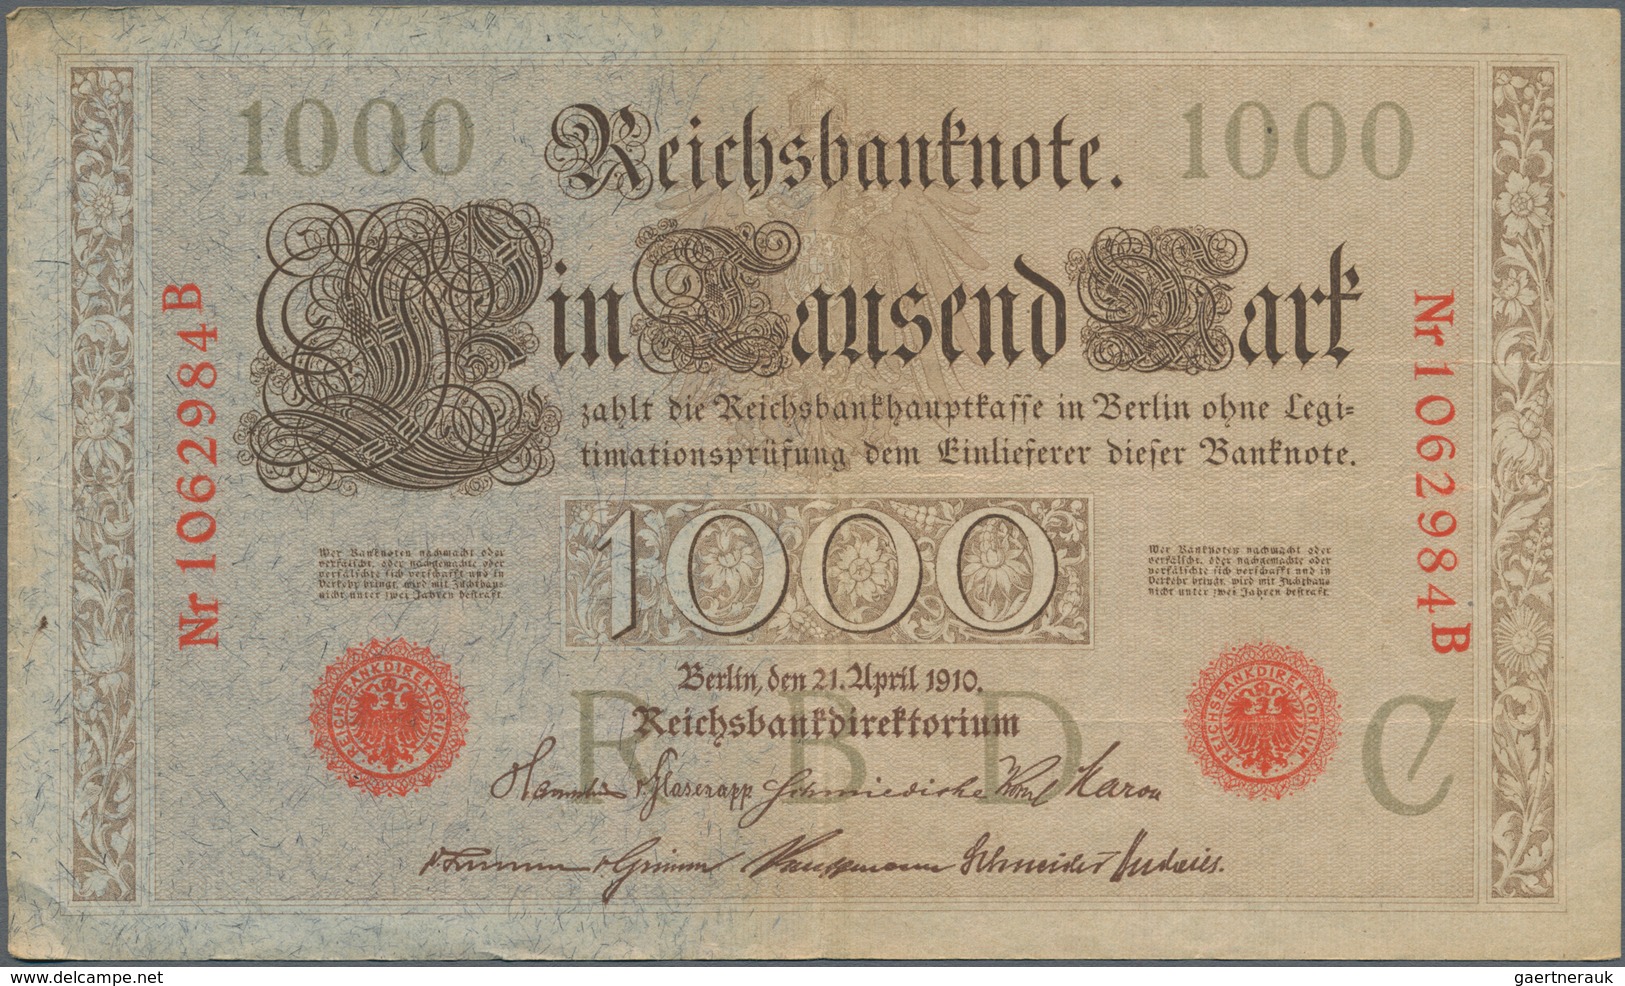 Alle Welt: Collection with about 100 banknotes from Germany 1908-1923 (plus 10 DM 1999) and 100 bank